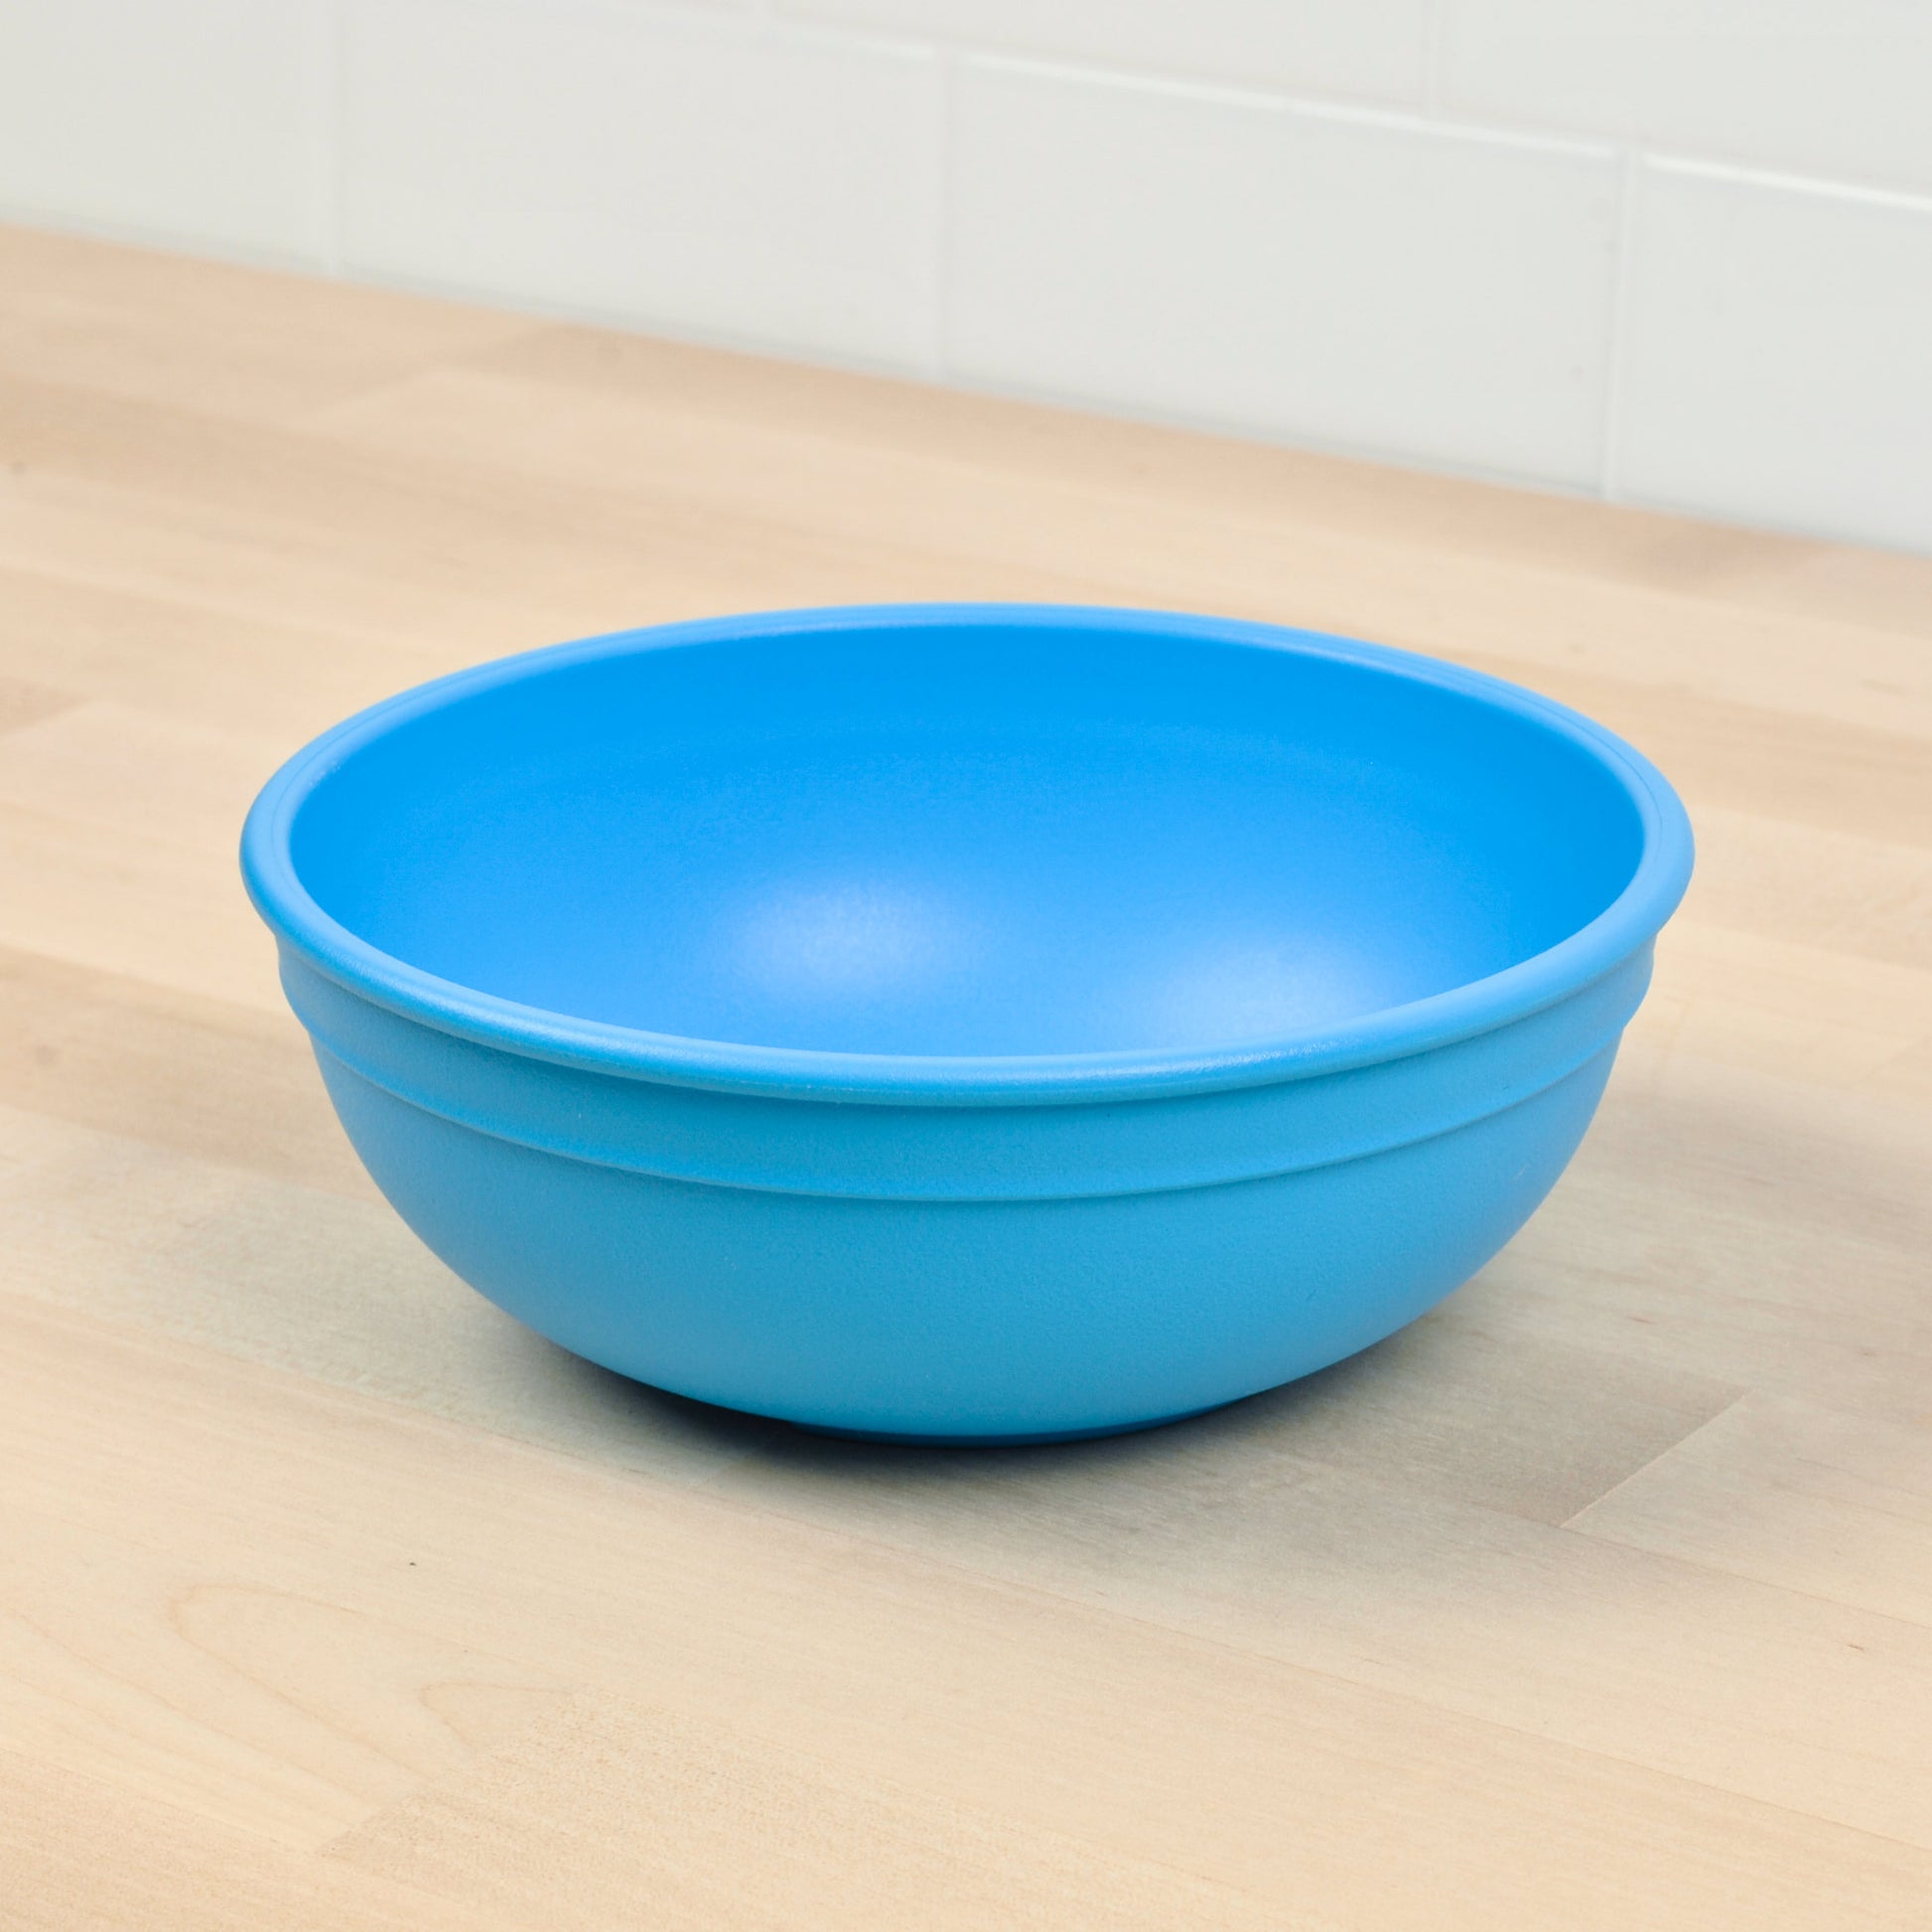 Re-Play Bowl | Sky Blue Large Size from Bear & Moo